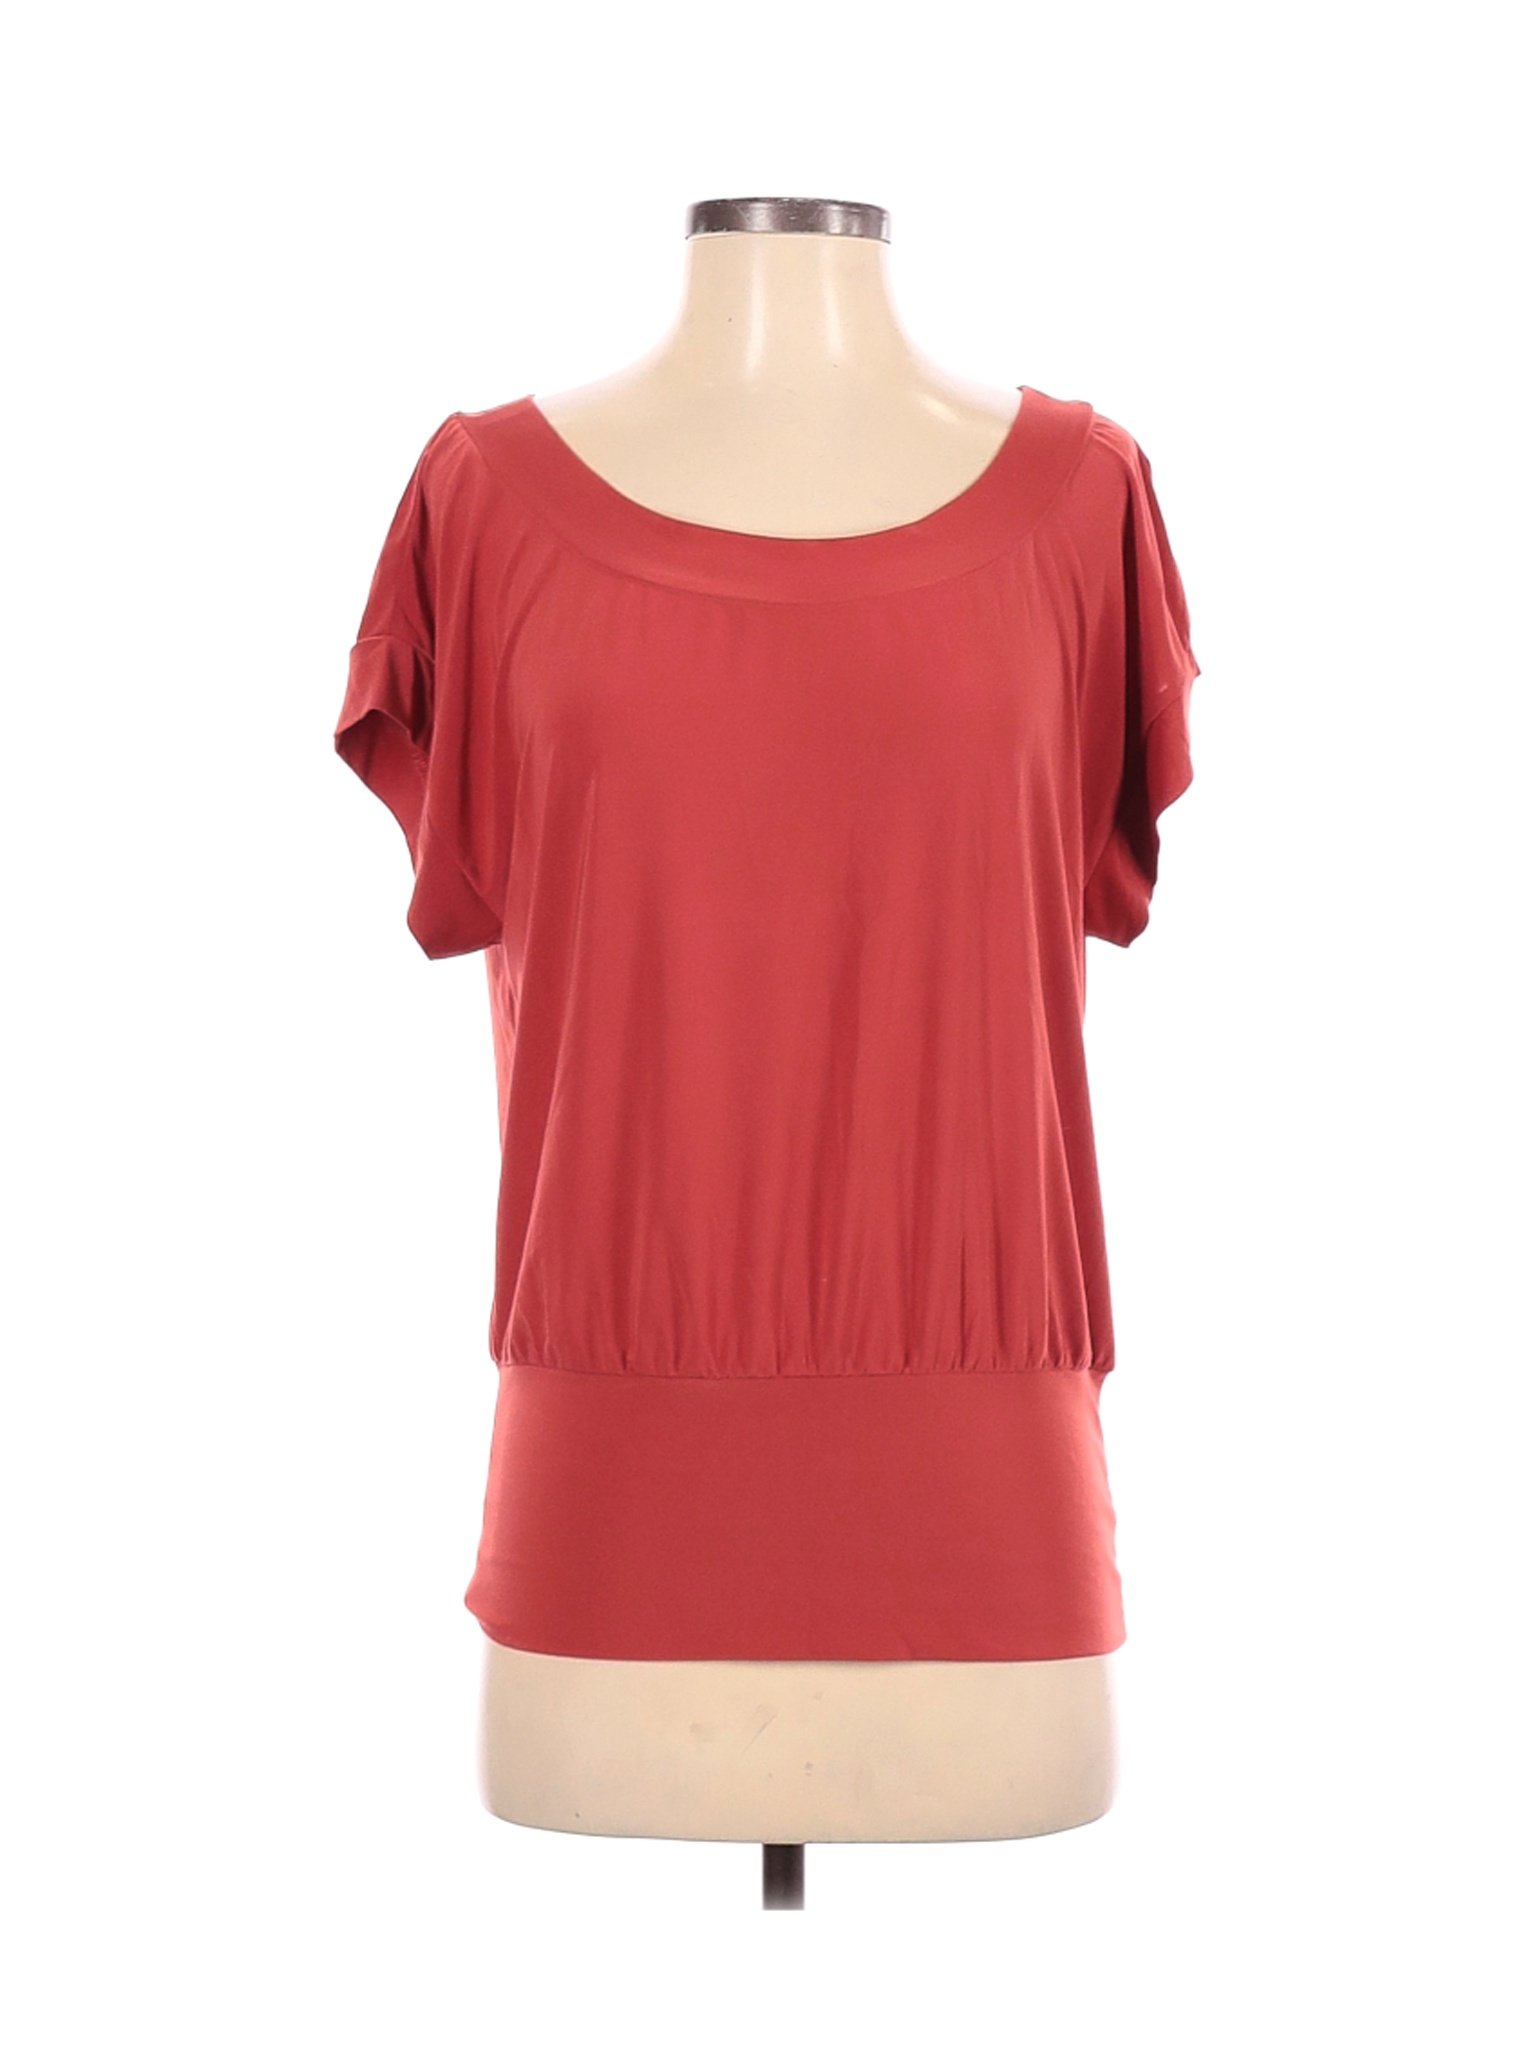 The Limited Women Red Short Sleeve Top S | eBay